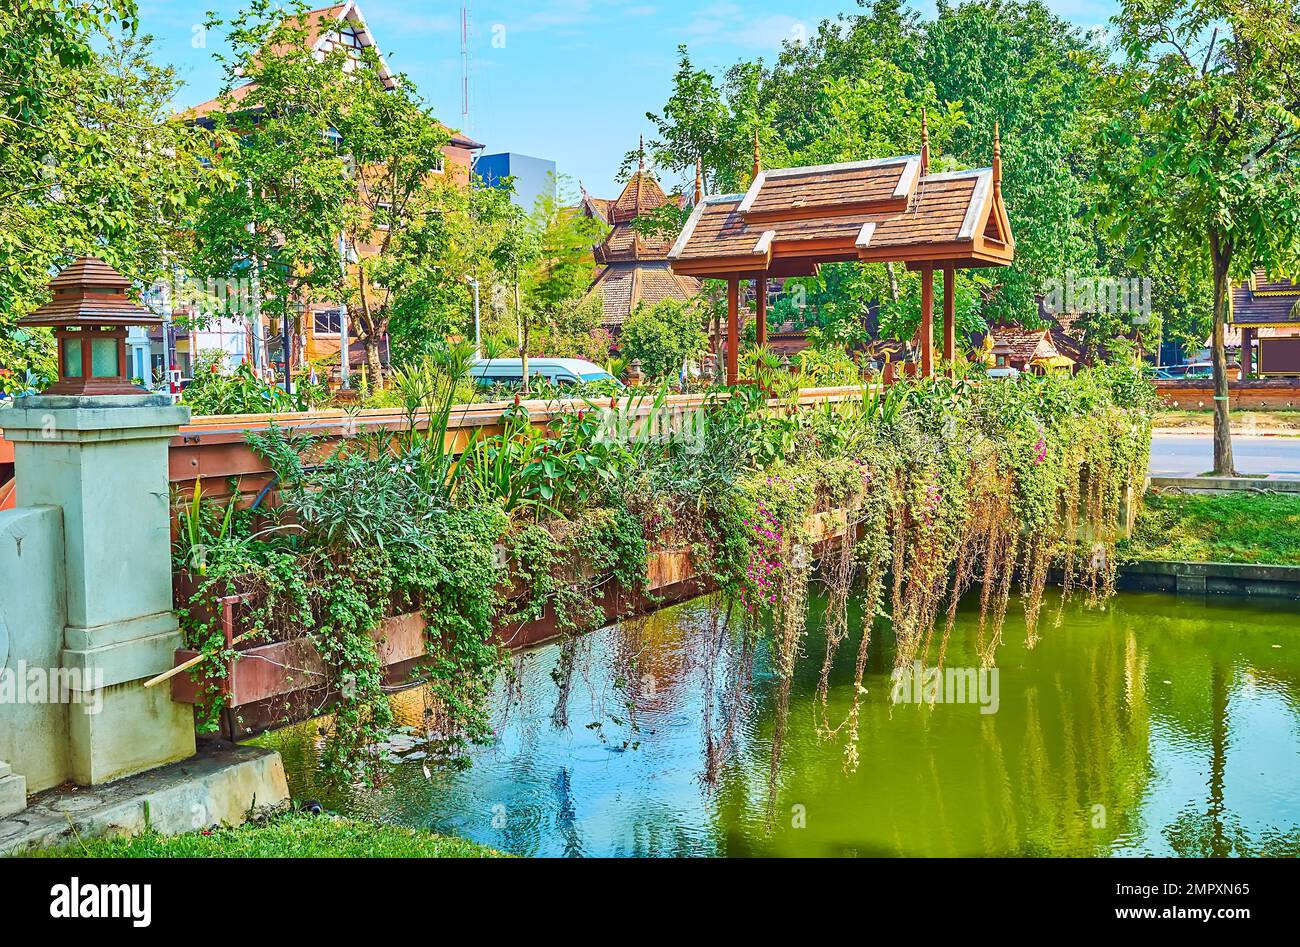 The flowering green park around the Old City Moat with a small footbidge with hanging orchids, Chiang Mai, Thailand Stock Photo